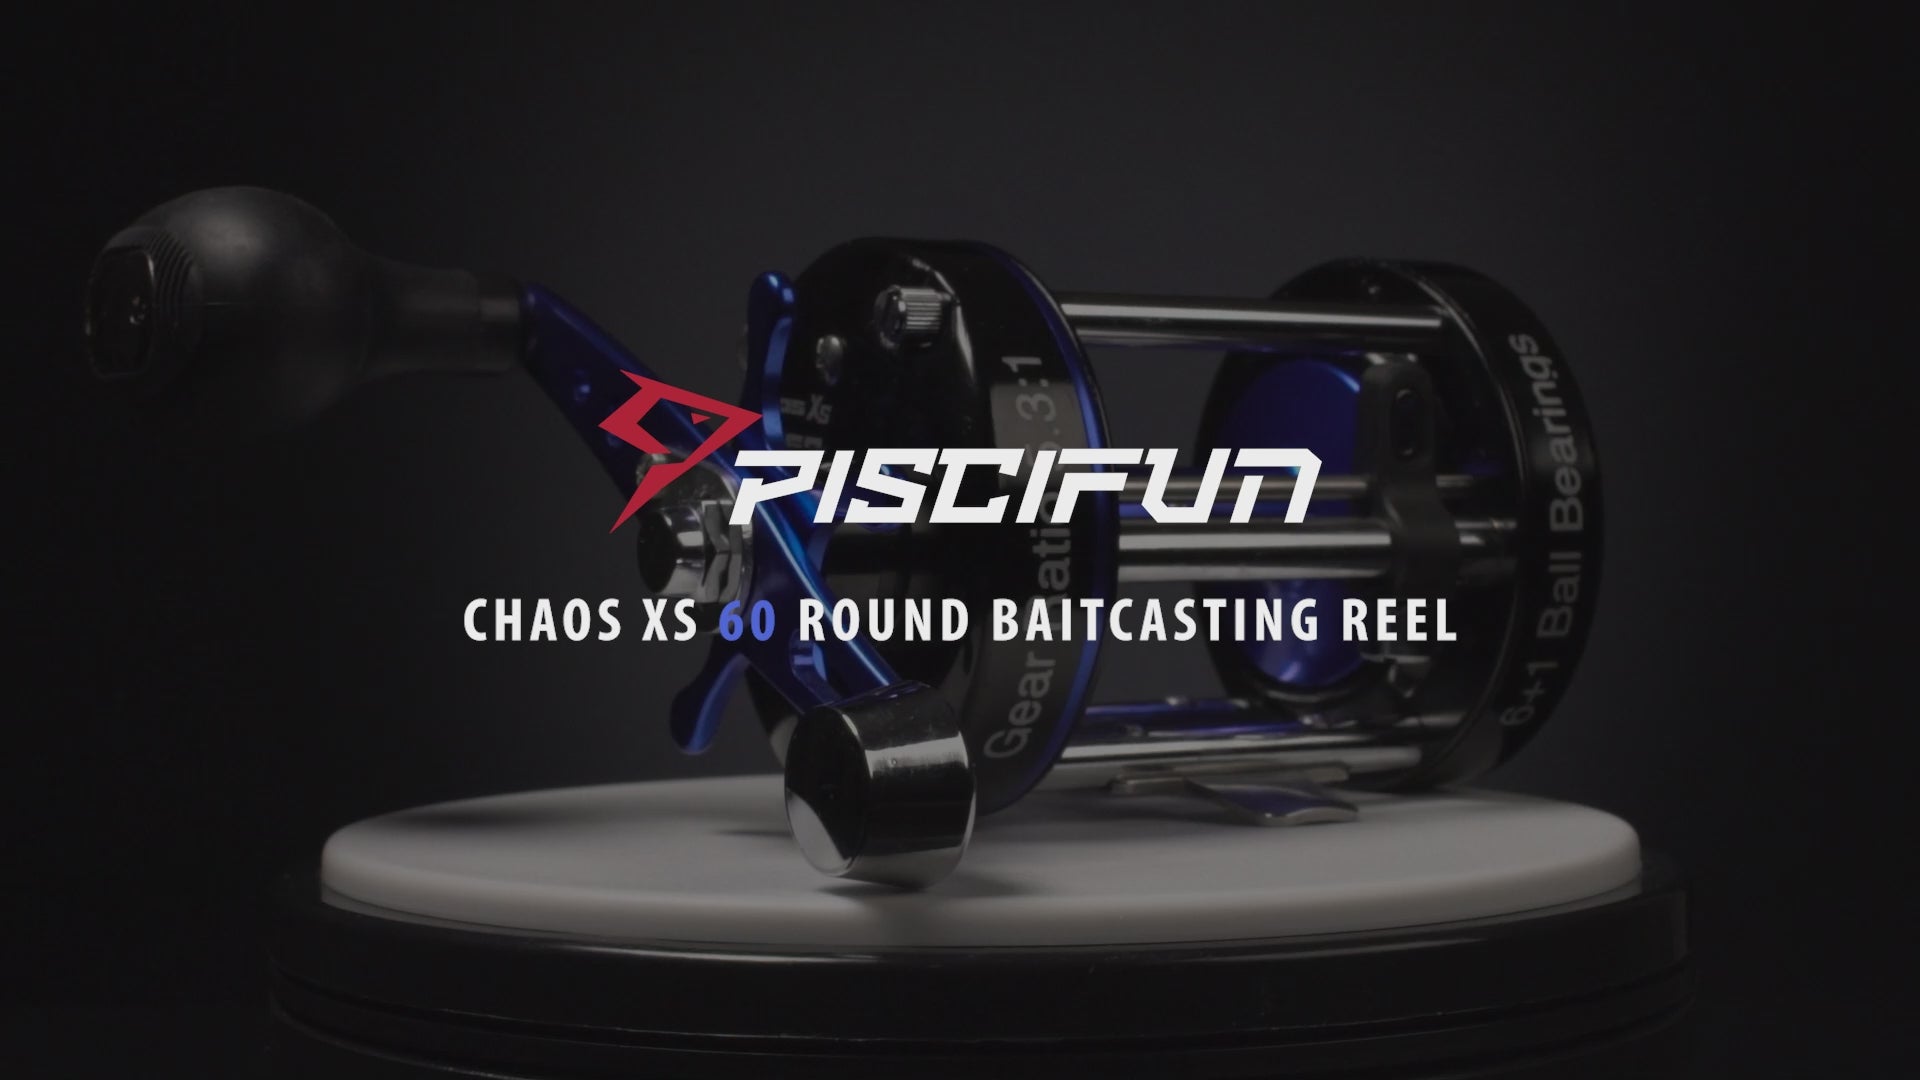 Piscifun Chaos Xs Round Baitcasting Reel 5.3:1 Up To 9kg Metal Body  Conventional Saltwater Fishing Reels For Catfish Musky Bass - Fishing Reels  - AliExpress